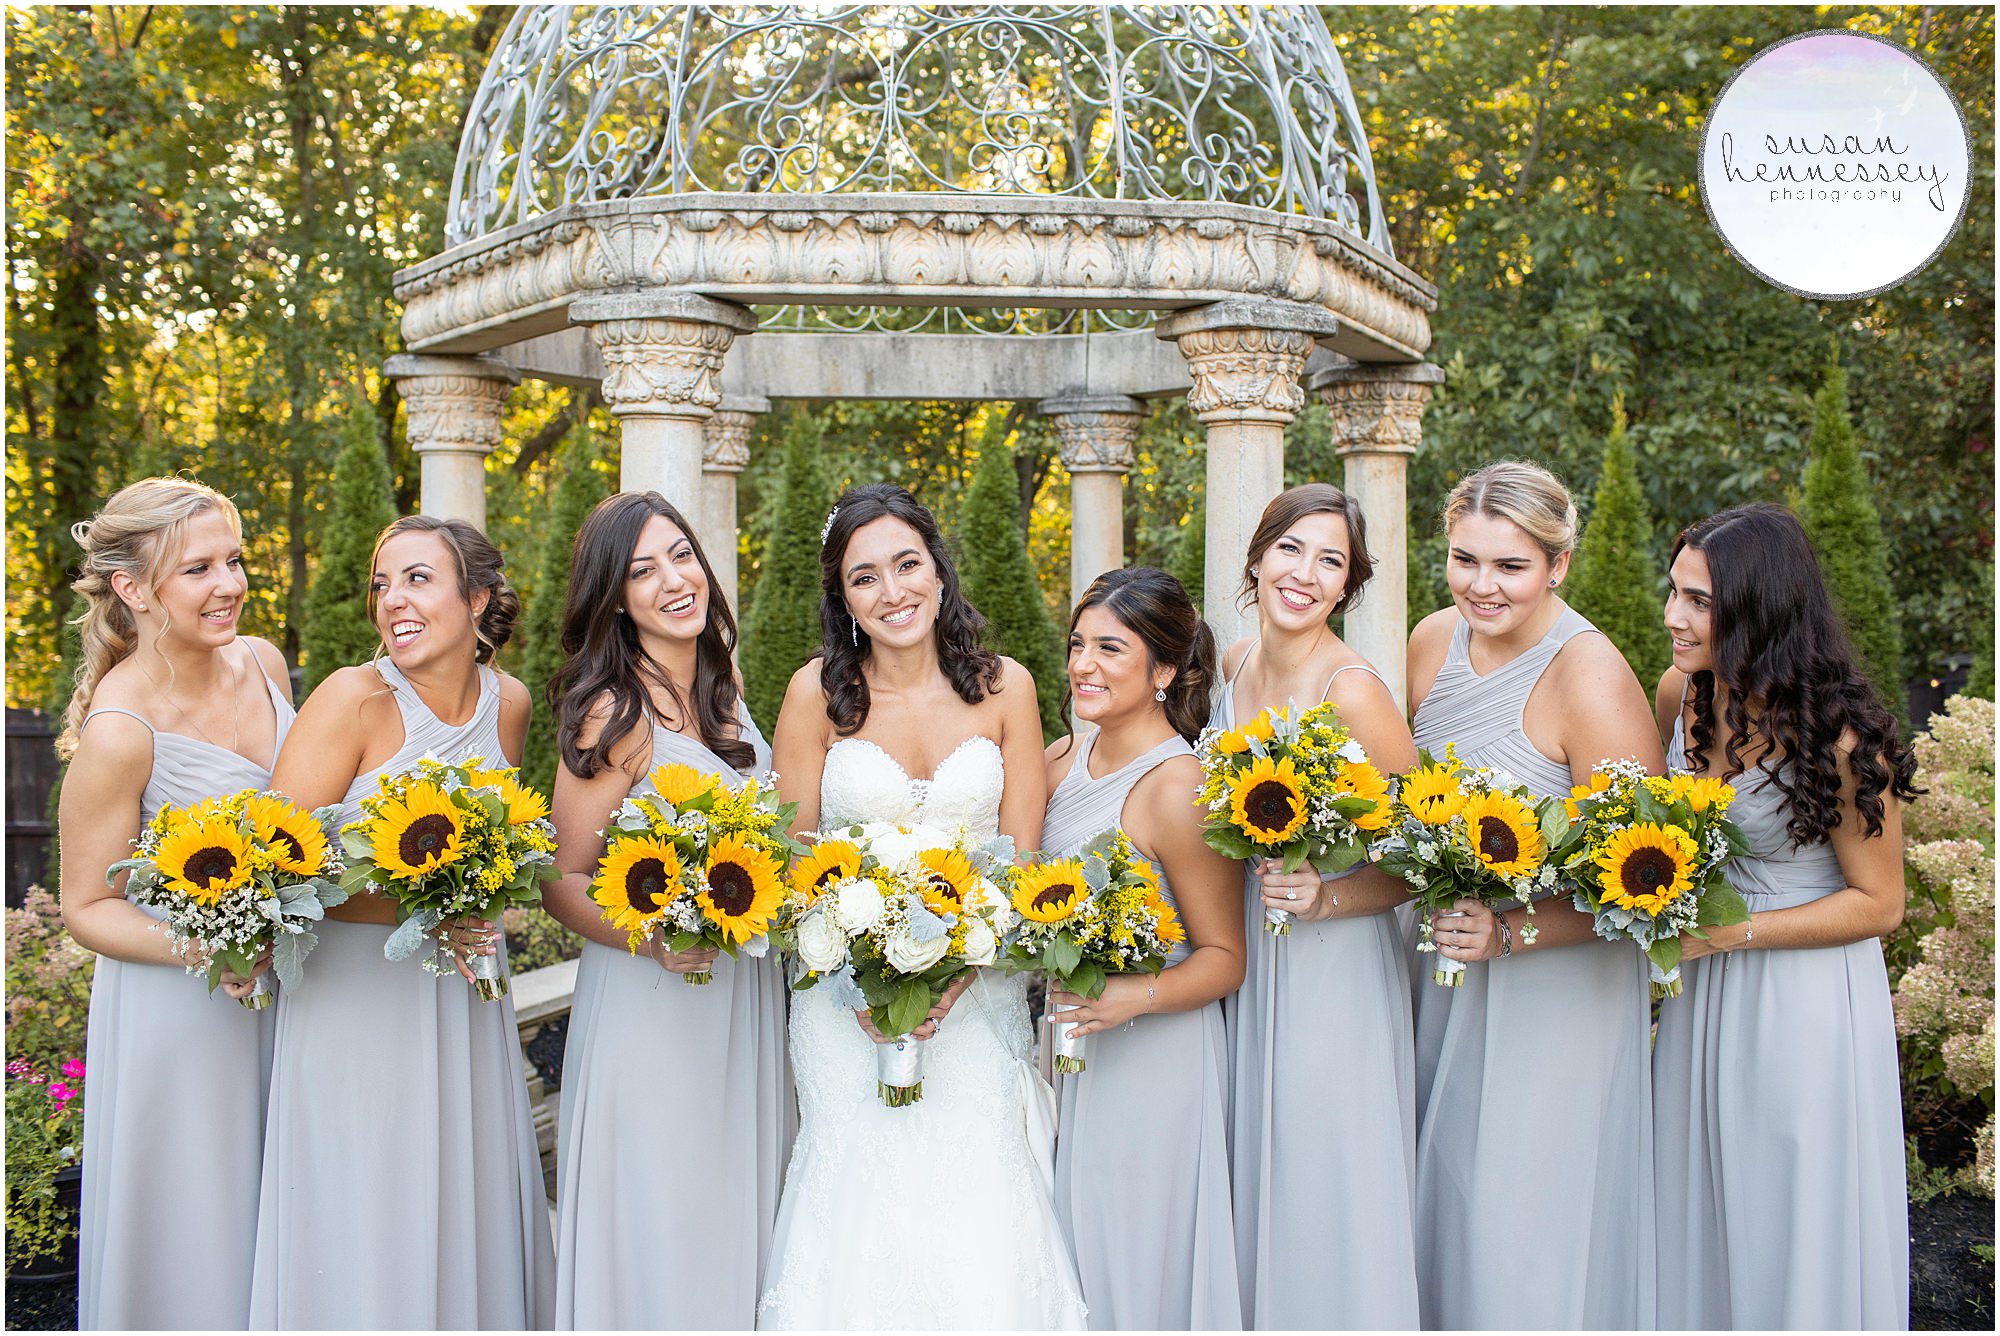 Bride and bridesmaids laugh with sunflower bouquets